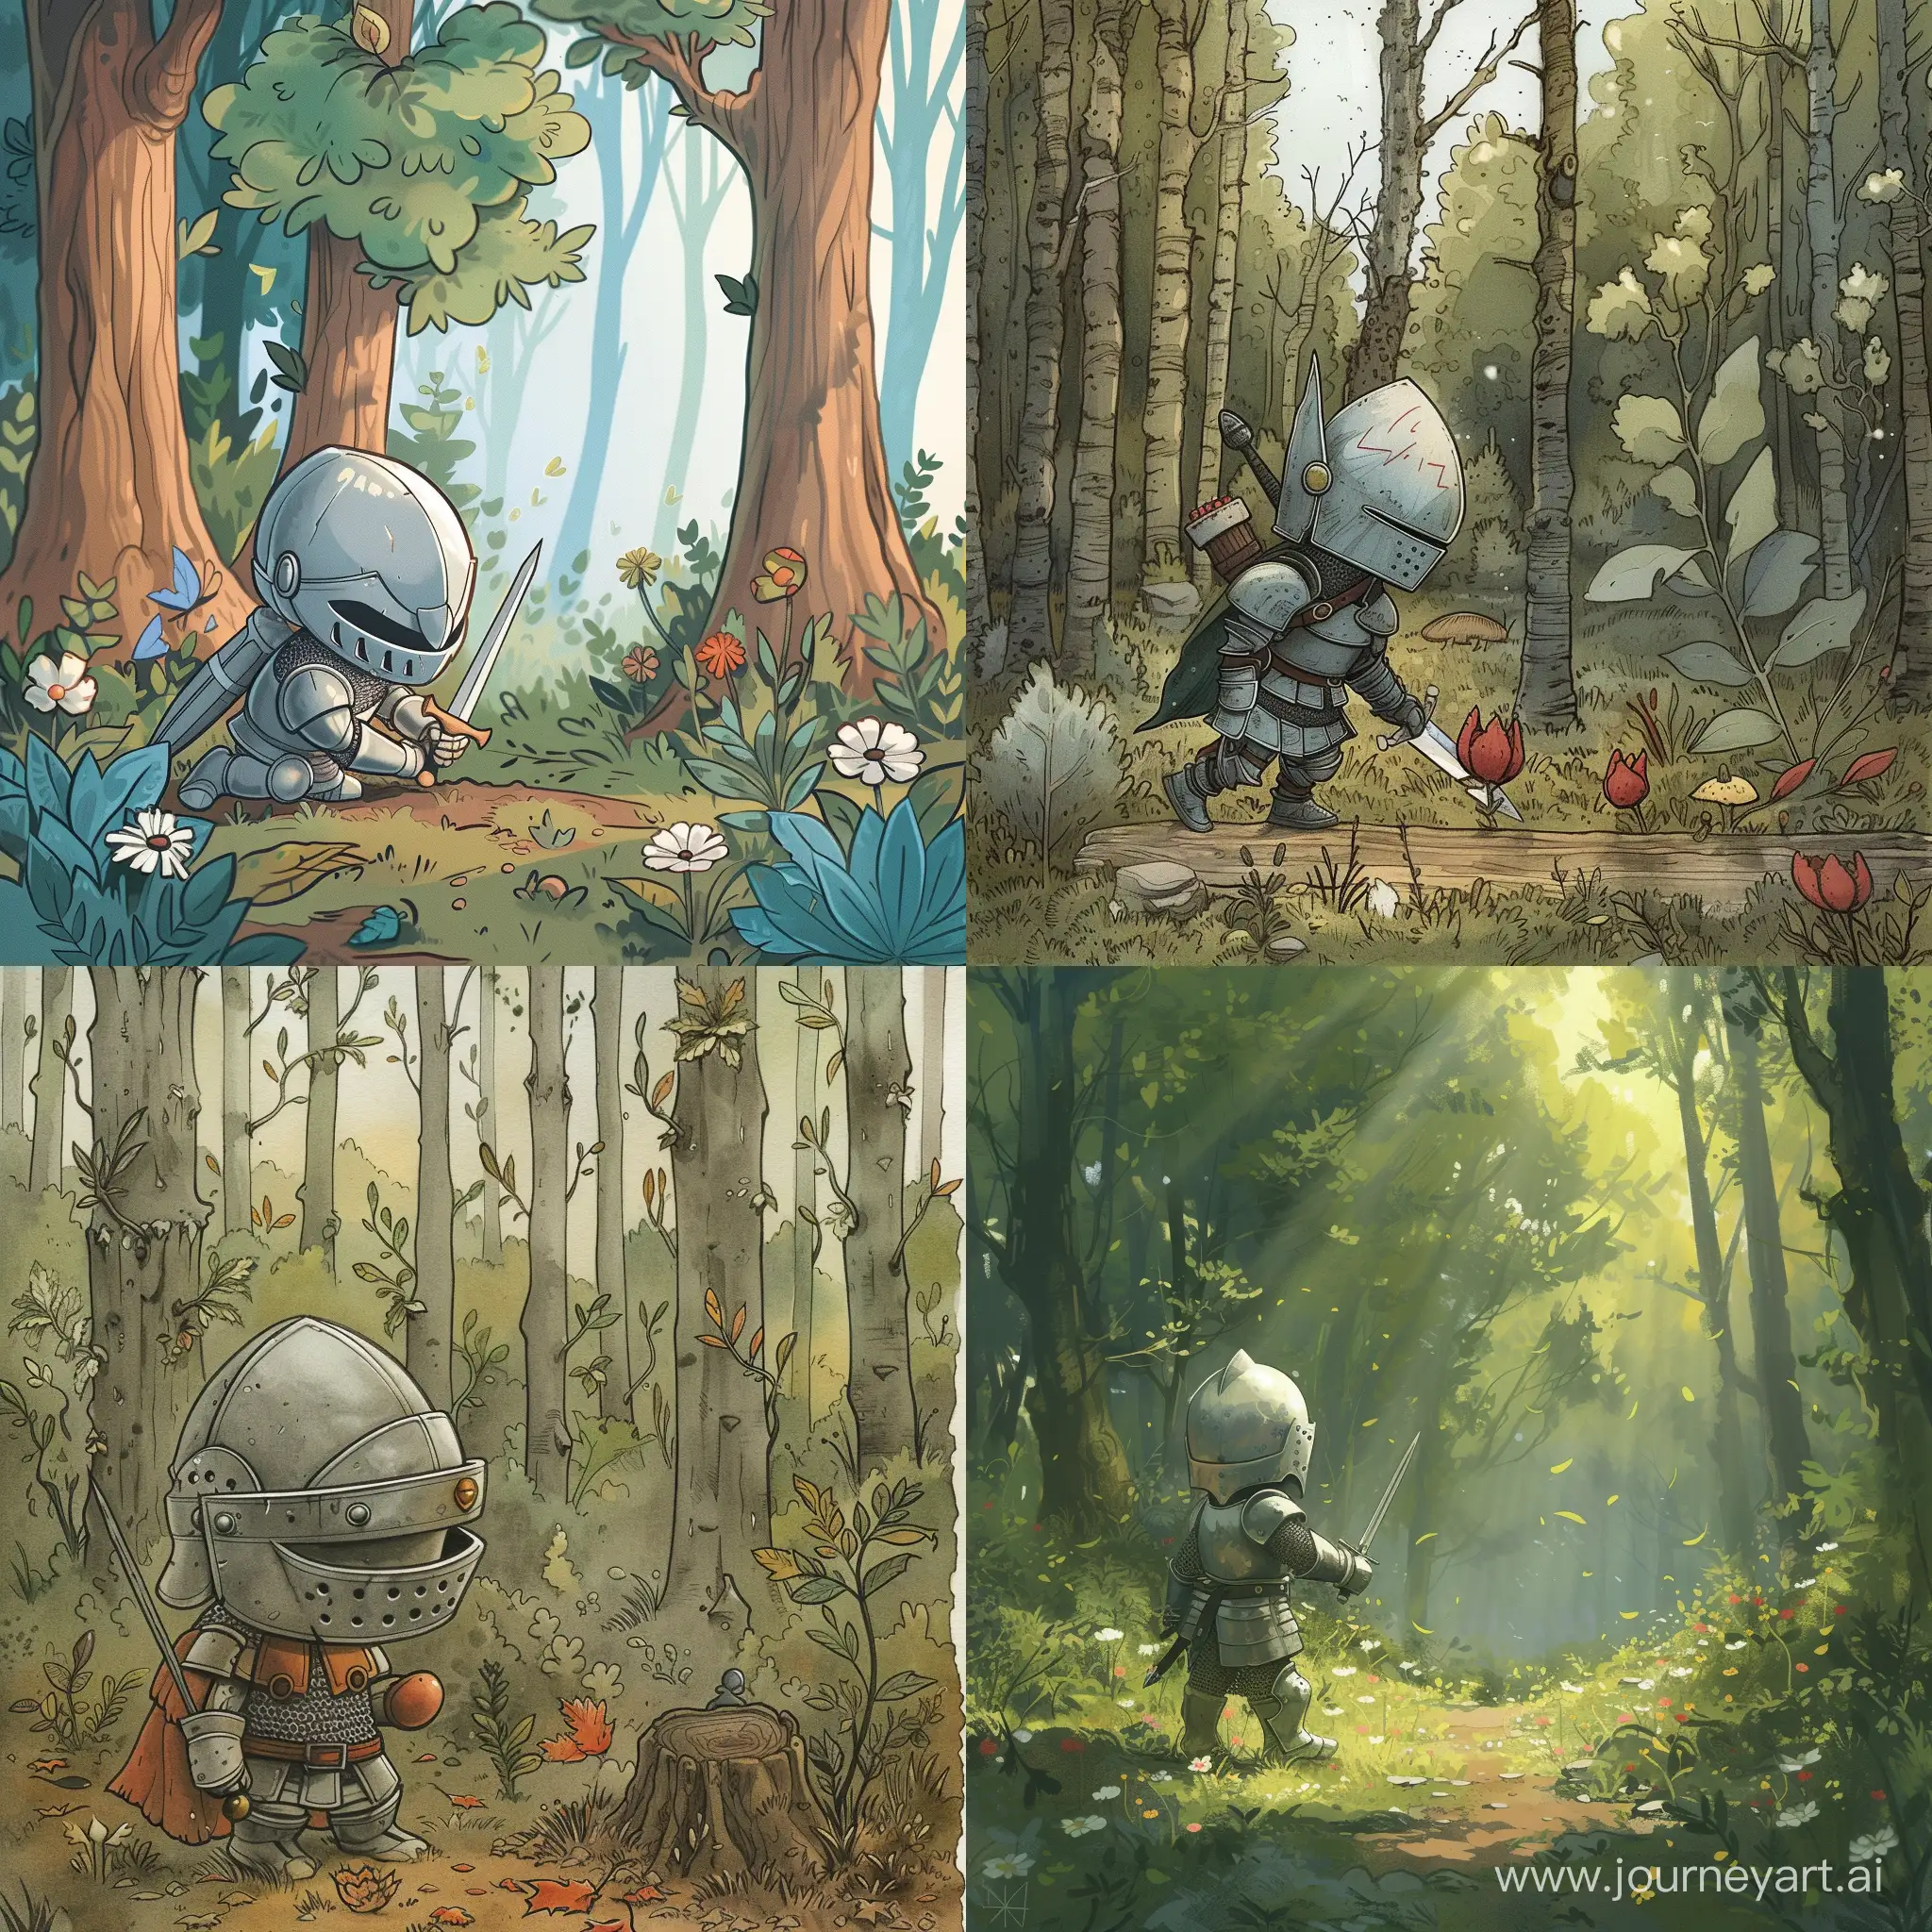 Fantasy comic about little knight playing in the forest